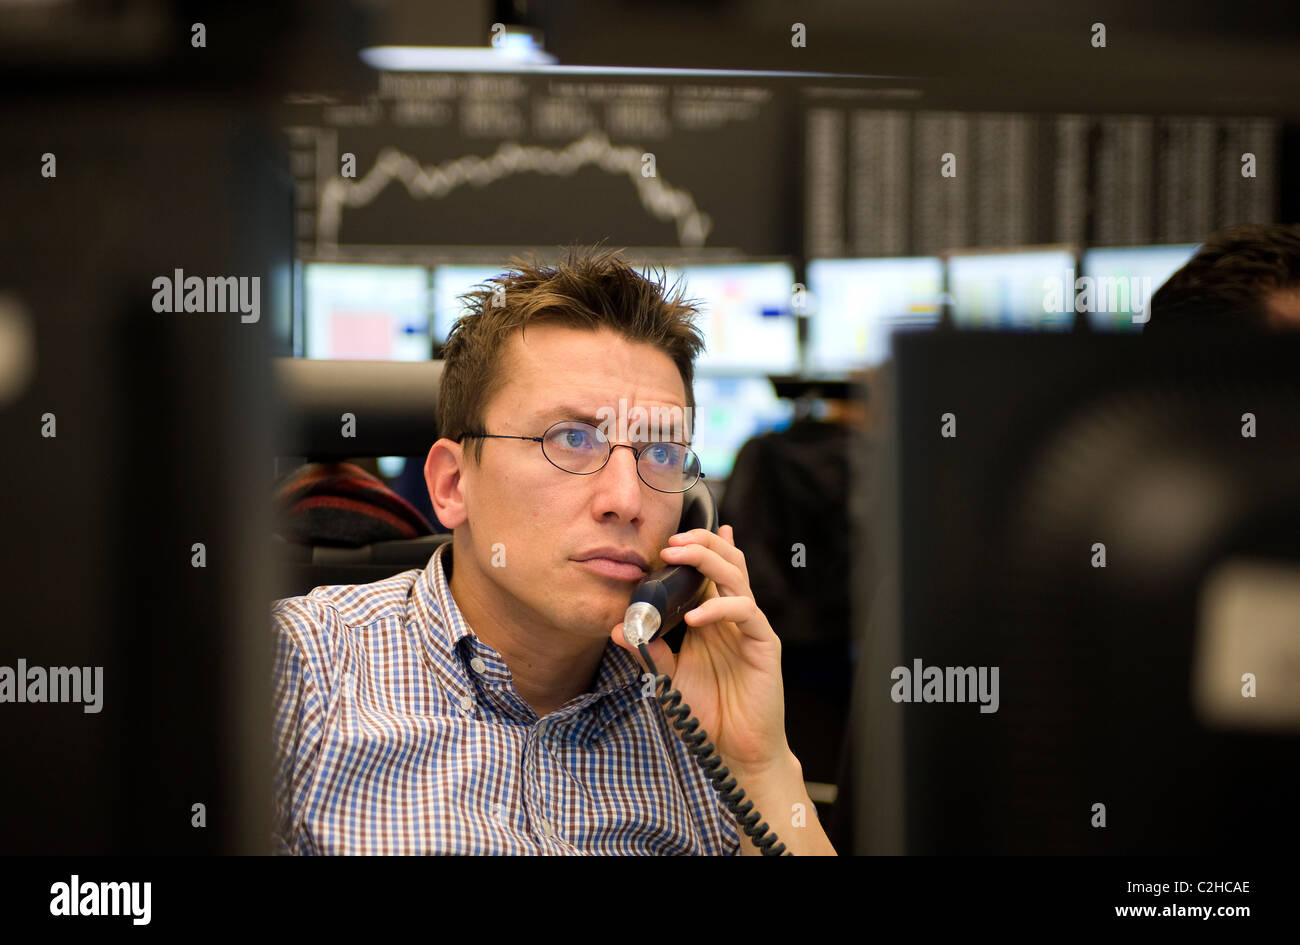 An equity trader at the screen of his computer, Frankfurt am Main, Germany Stock Photo